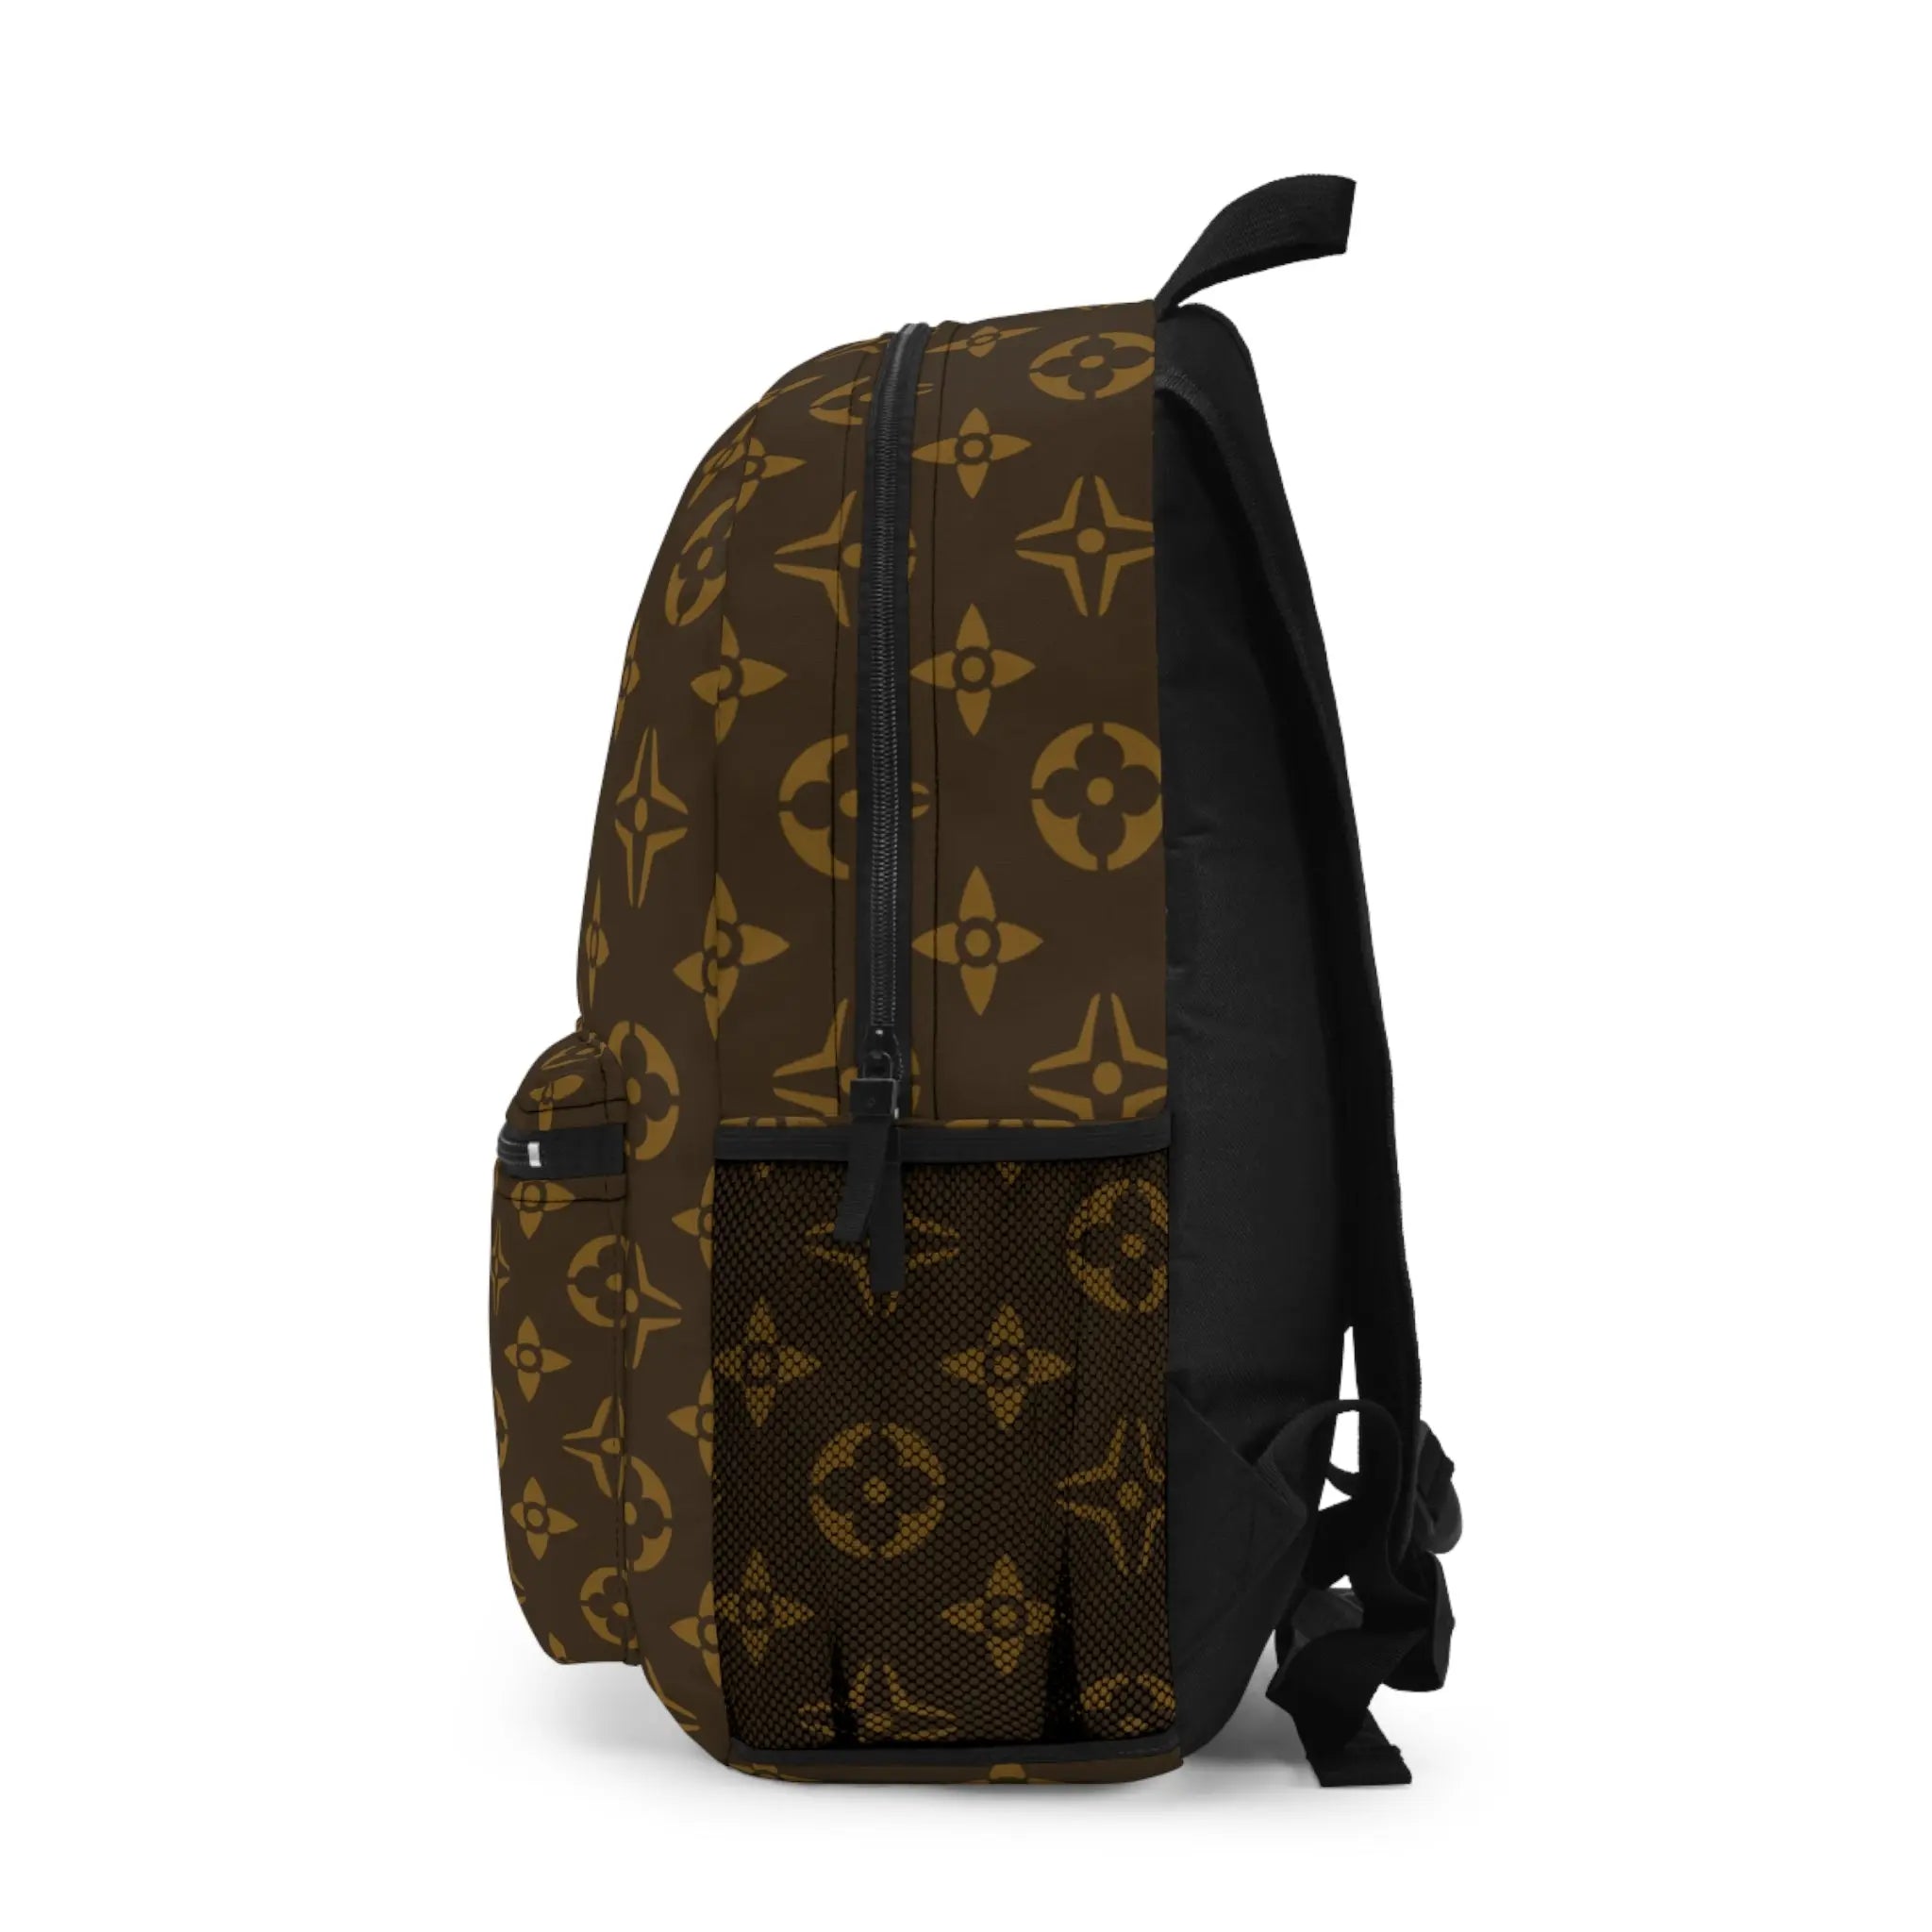  Abby Pattern Large Icons in Brown and Gold Backpack, Unisex Backpack Bags